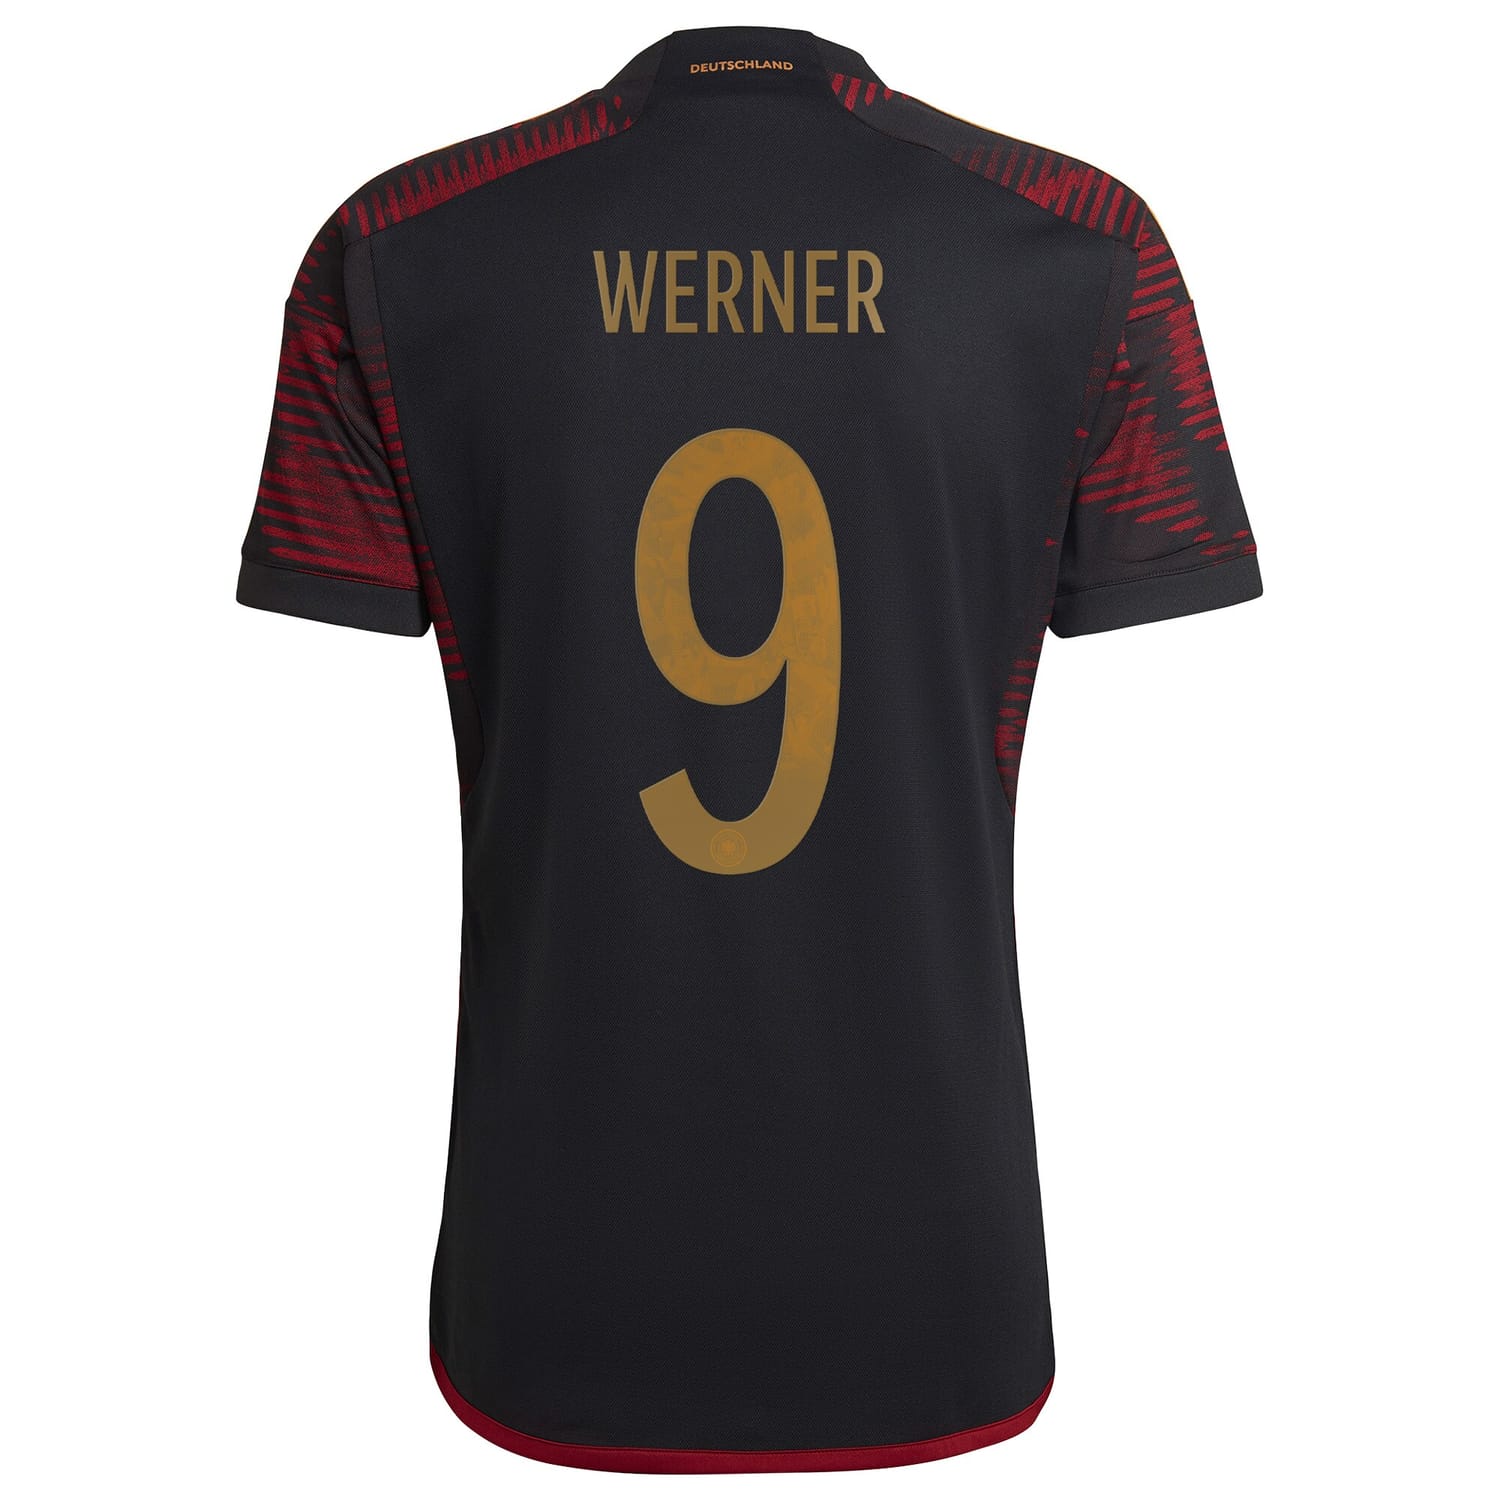 Germany National Team Away Jersey Shirt Black 2022-23 player Timo Werner printing for Men